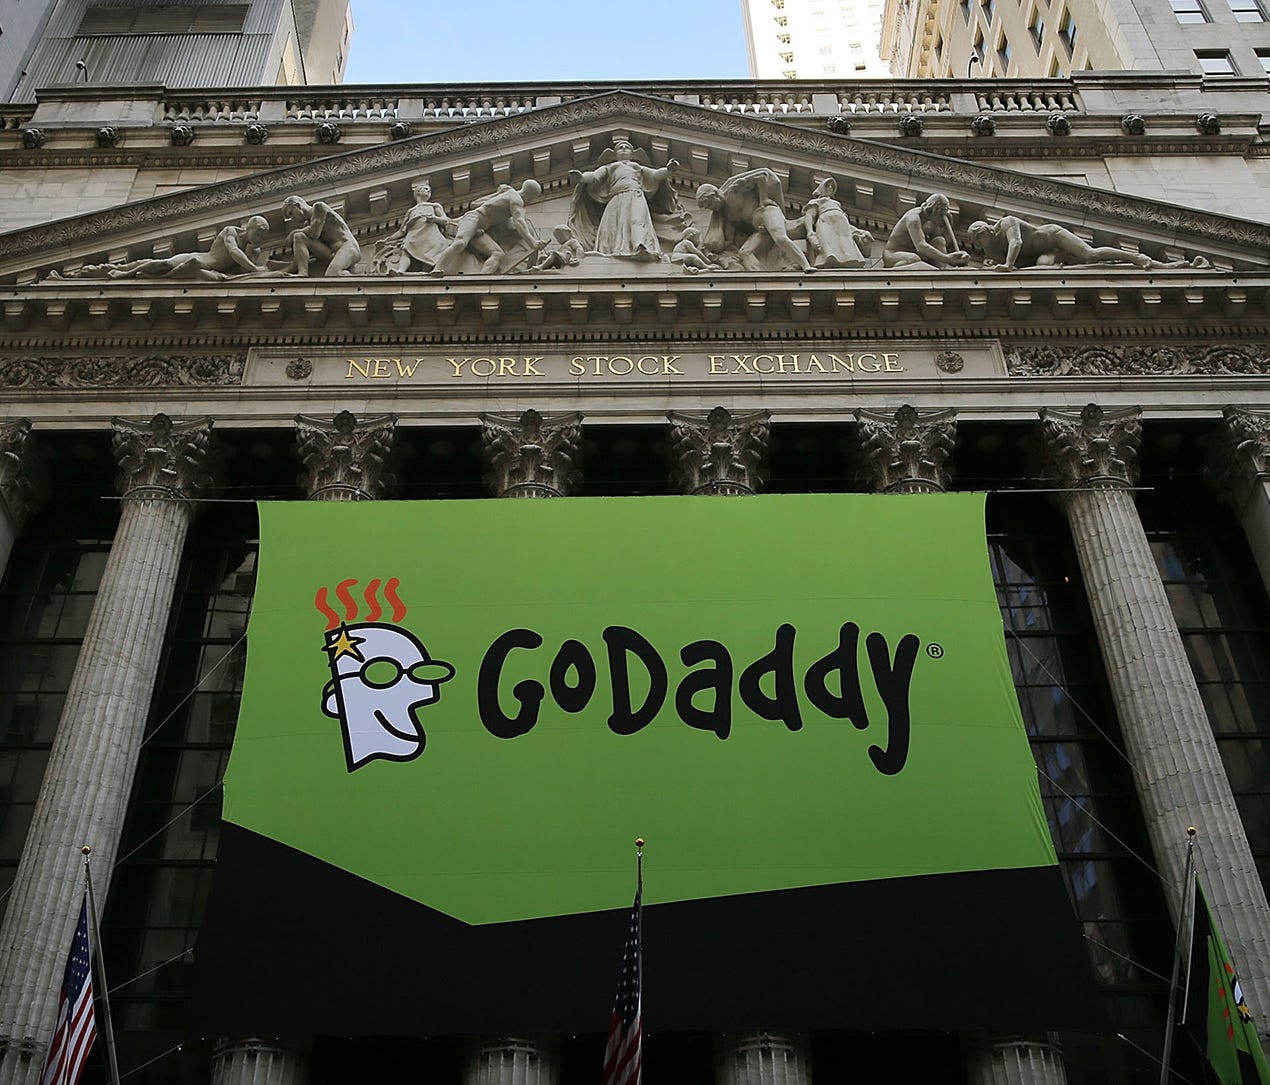 The GoDaddy banner hangs outside of the New York Stock Exchange as the website hosting service makes its initial public offering April 1, 2015, in New York City. On Sunday, Aug. 13, 2017, the company announced it would no longer provide service to th